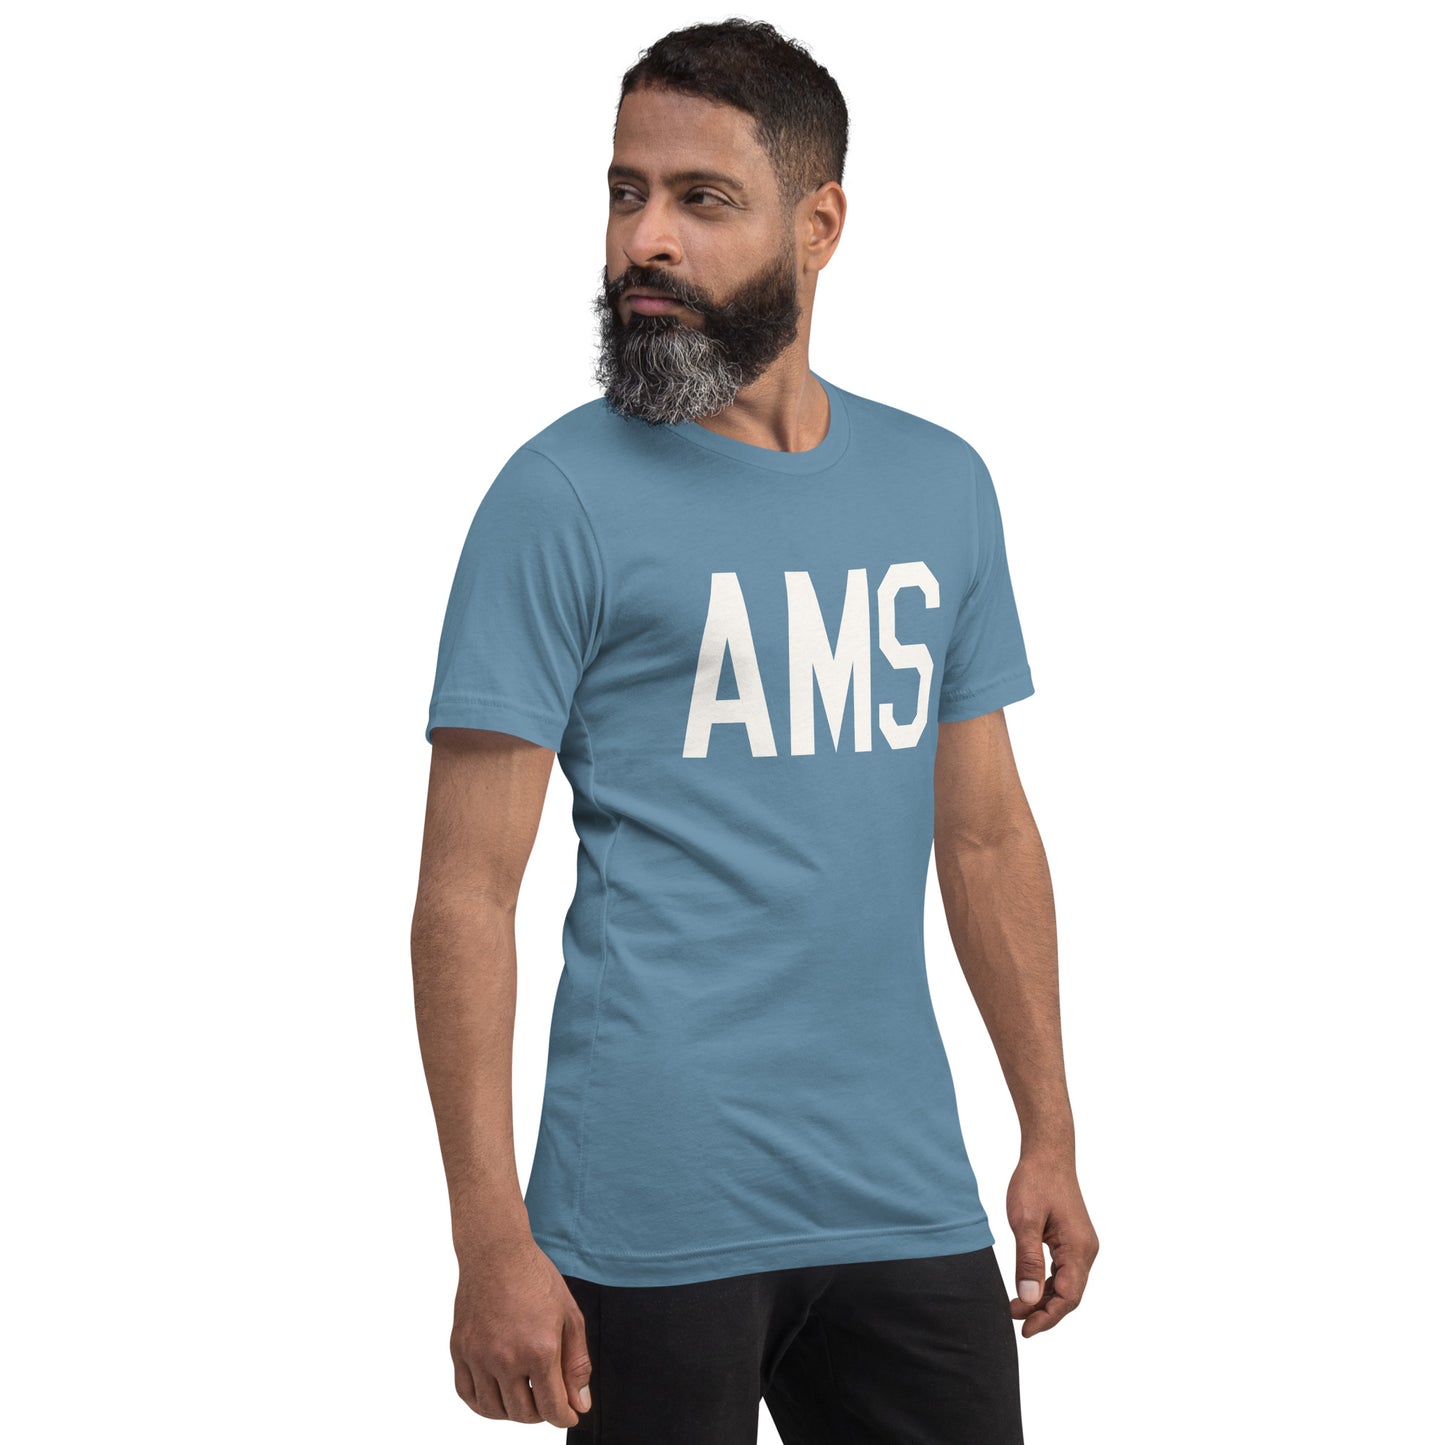 Airport Code T-Shirt - White Graphic • AMS Amsterdam • YHM Designs - Image 10